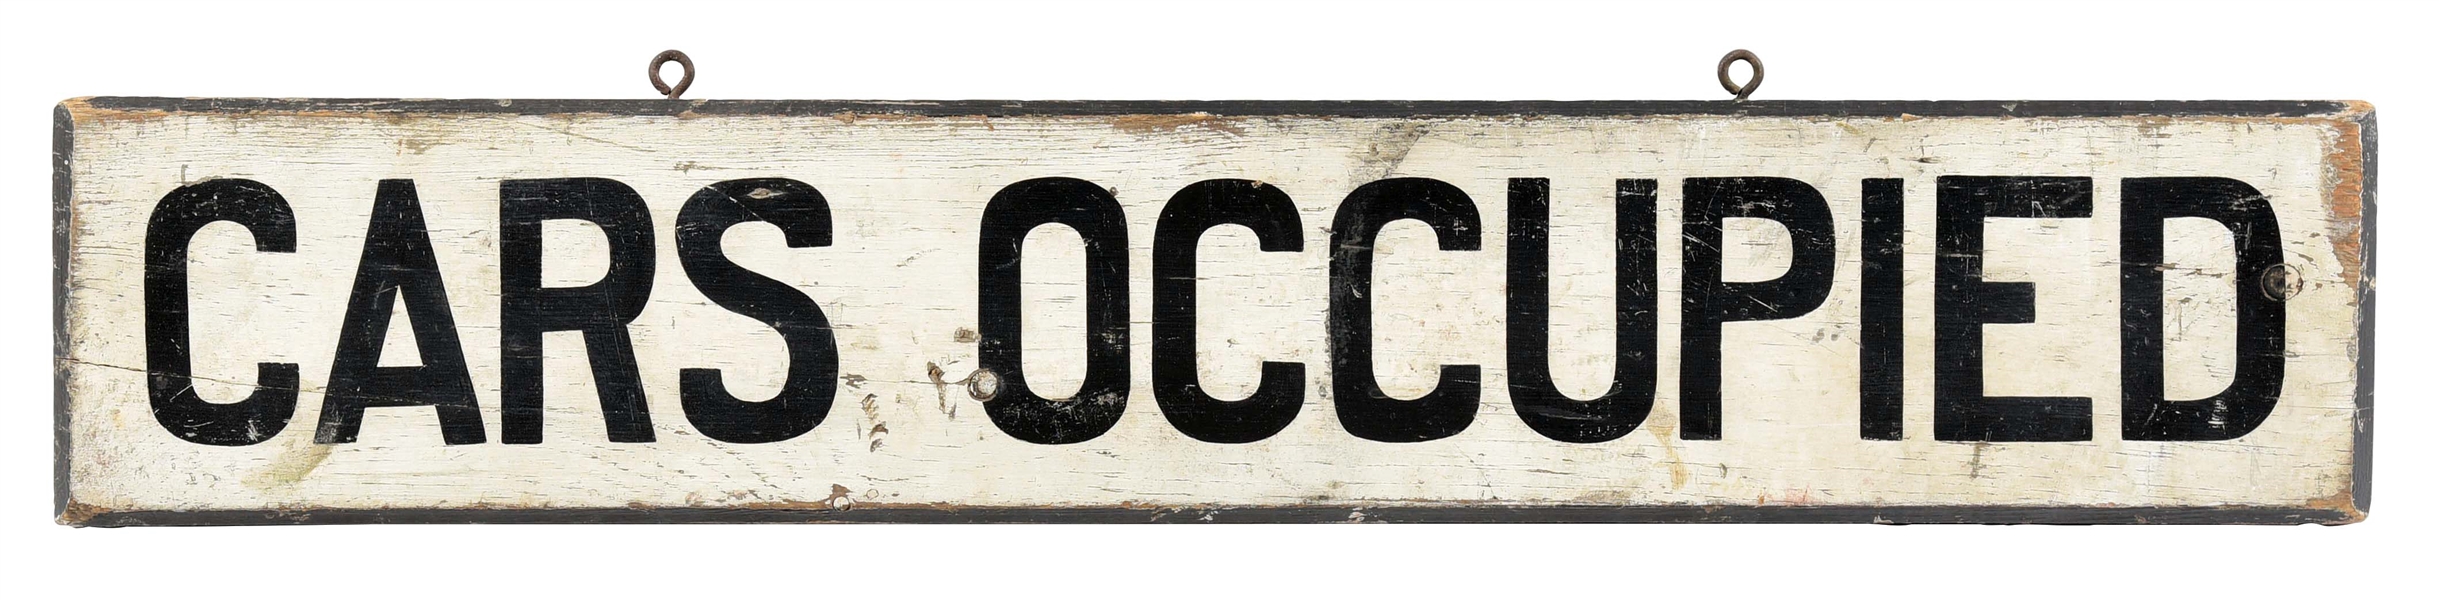 CARS OCCUPIED HAND PAINTED WOOD SIGN W/ BEVELED EDGE. 